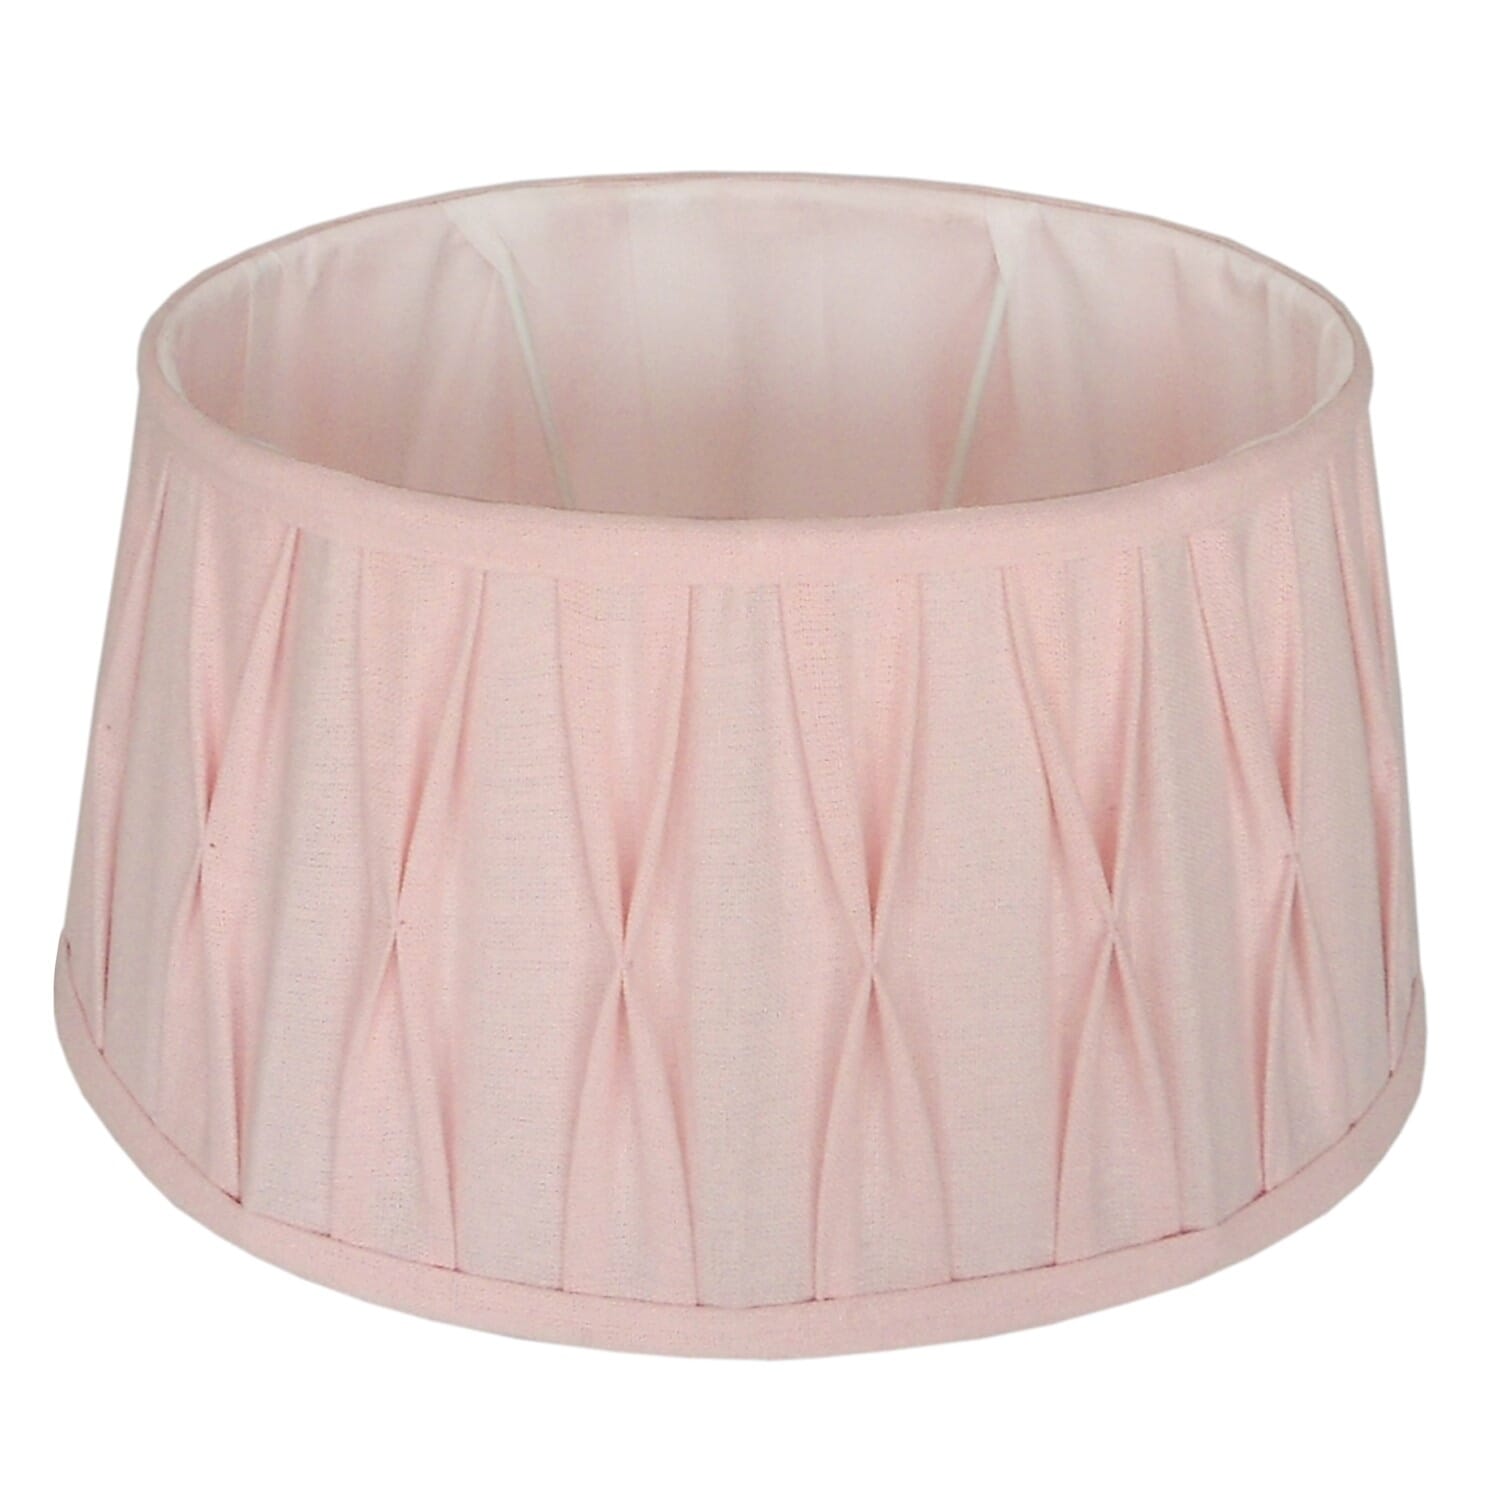 Standing lampshade pleated Riva oval 33 cm pink